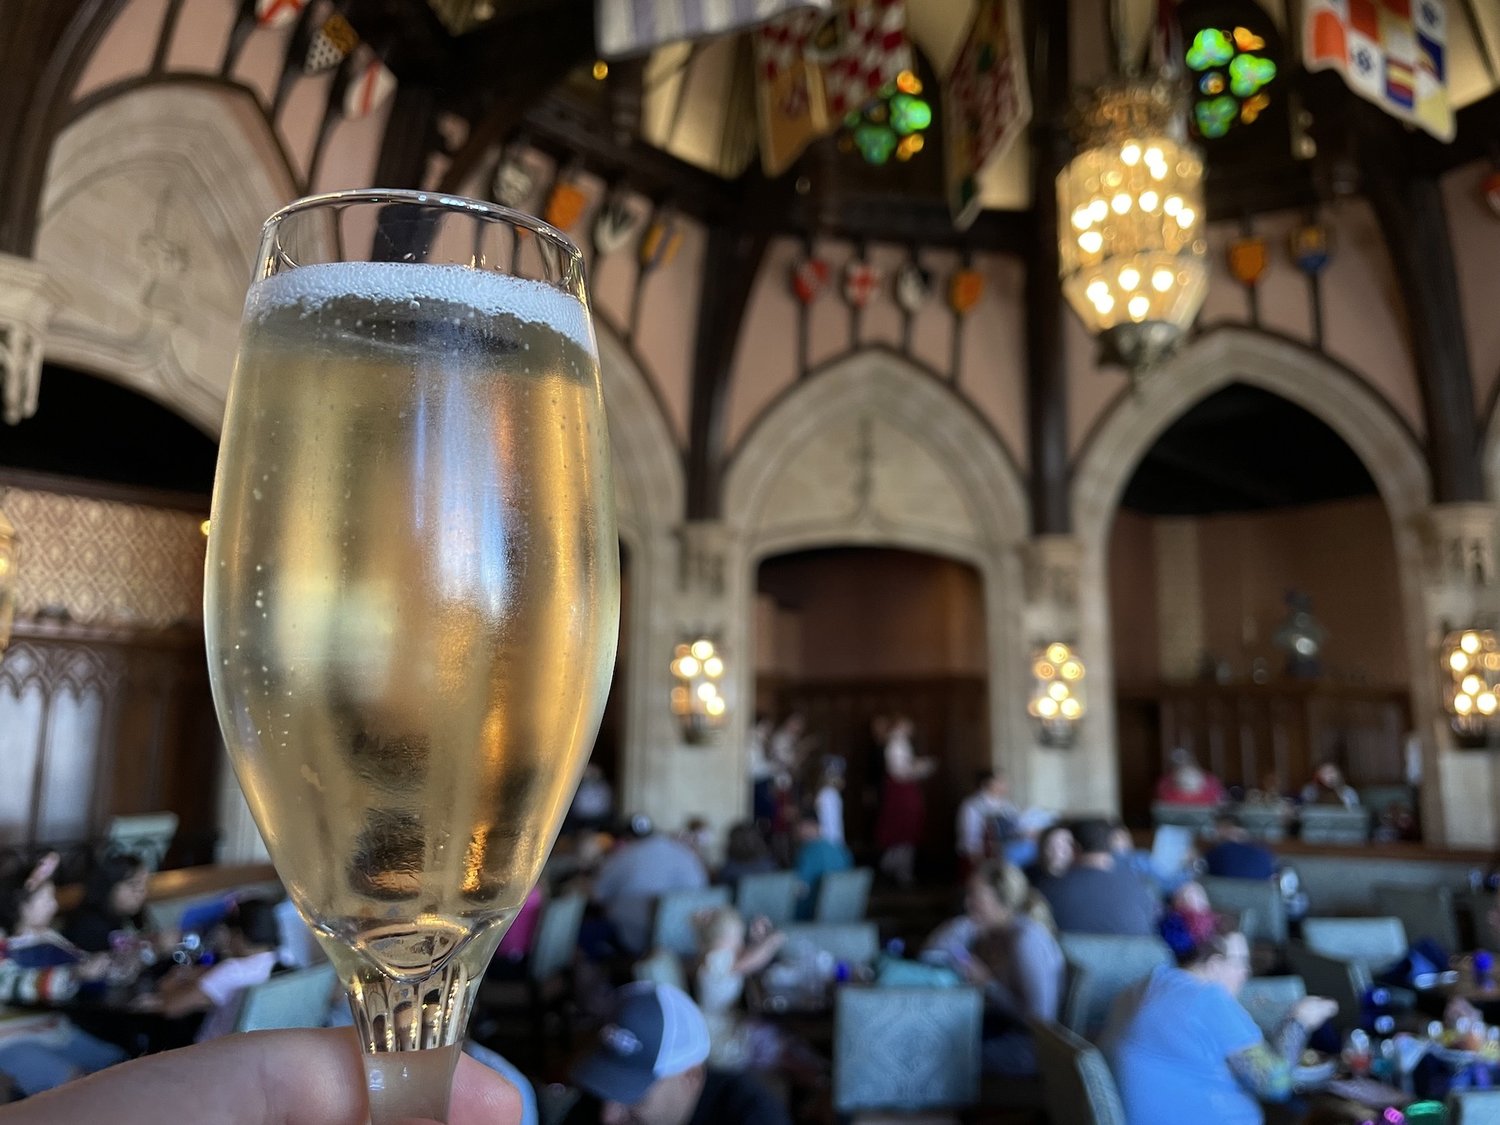 https://www.mousehacking.com/blog/where-to-get-beer-and-alcohol-at-magic-kingdom